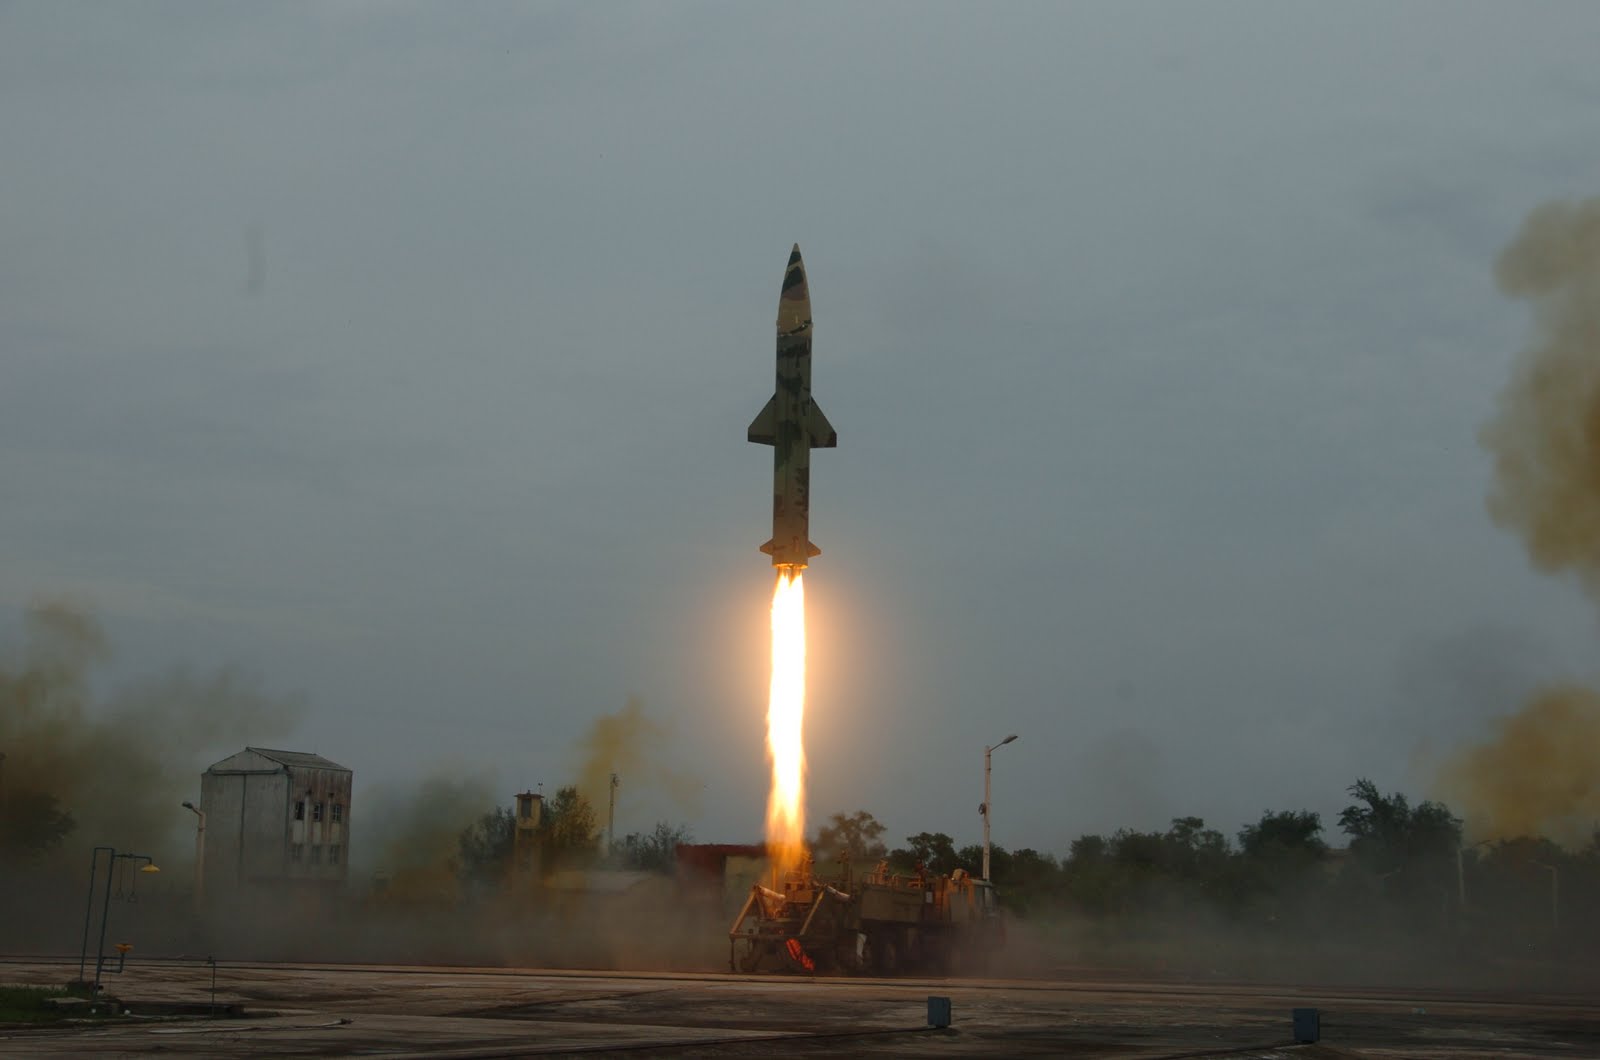 10 Points to Know About Prithvi II Missile